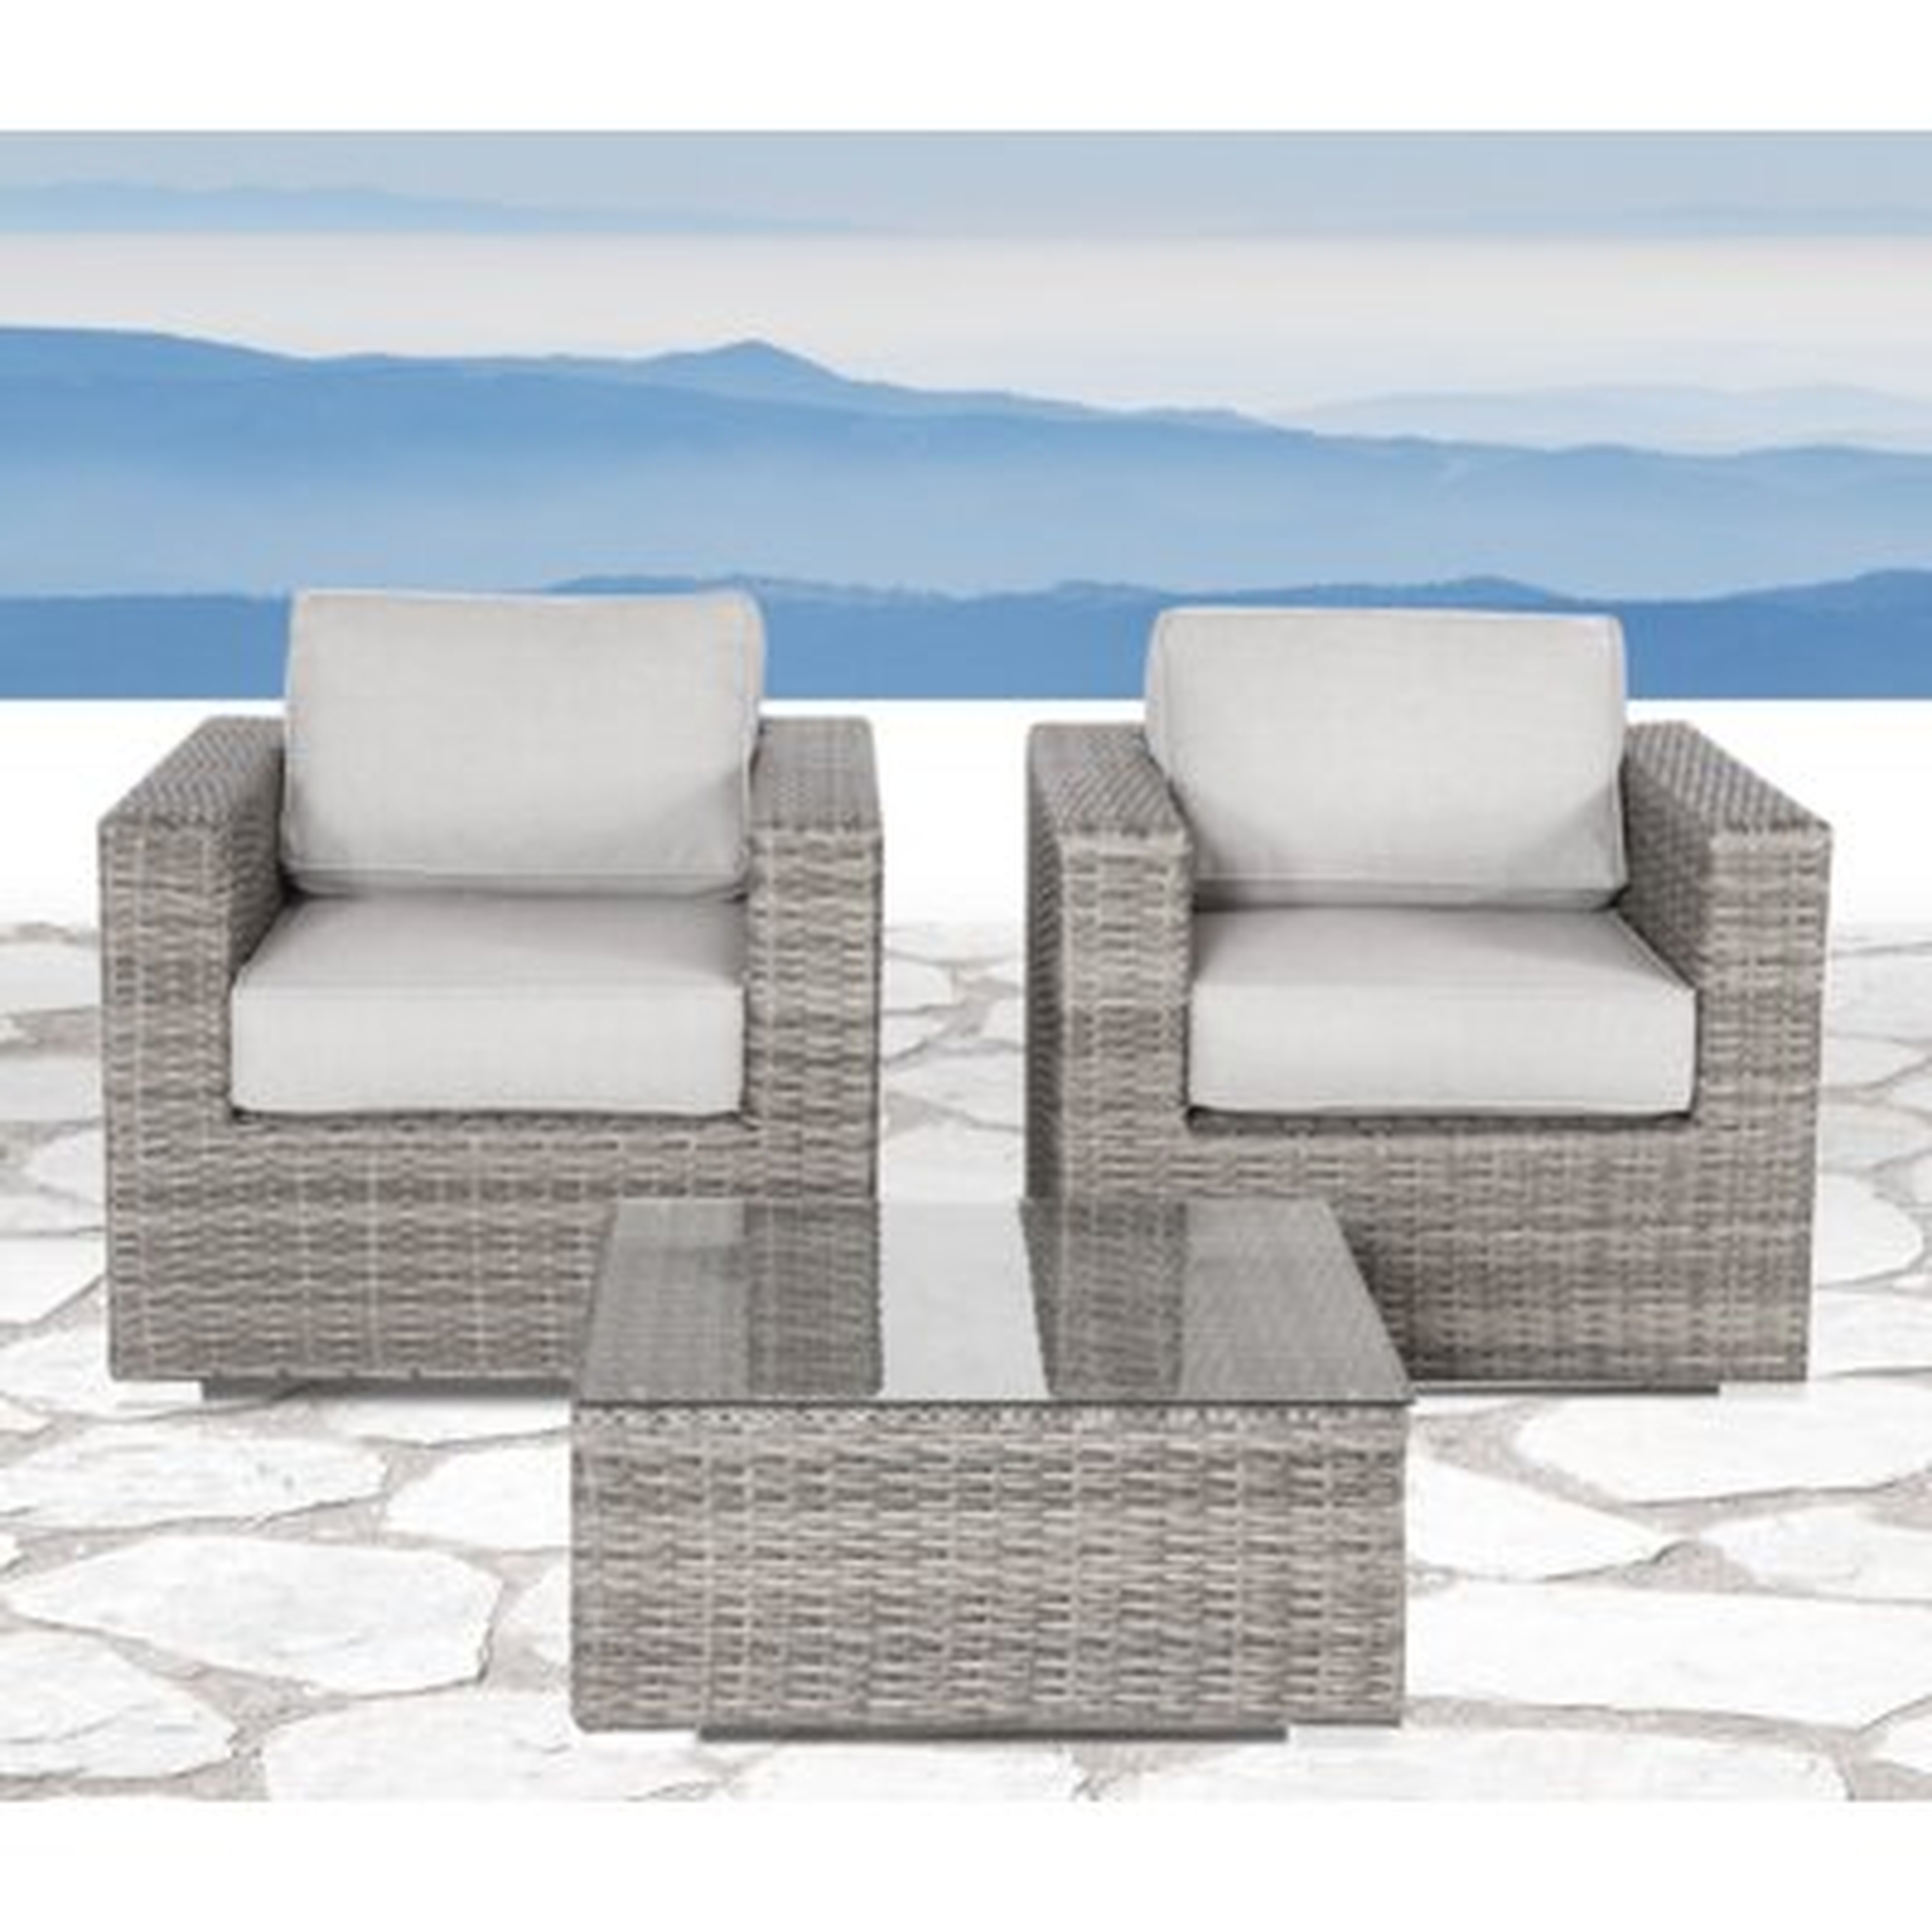 Darvin 3 Piece Seating Group with Cushions - Wayfair